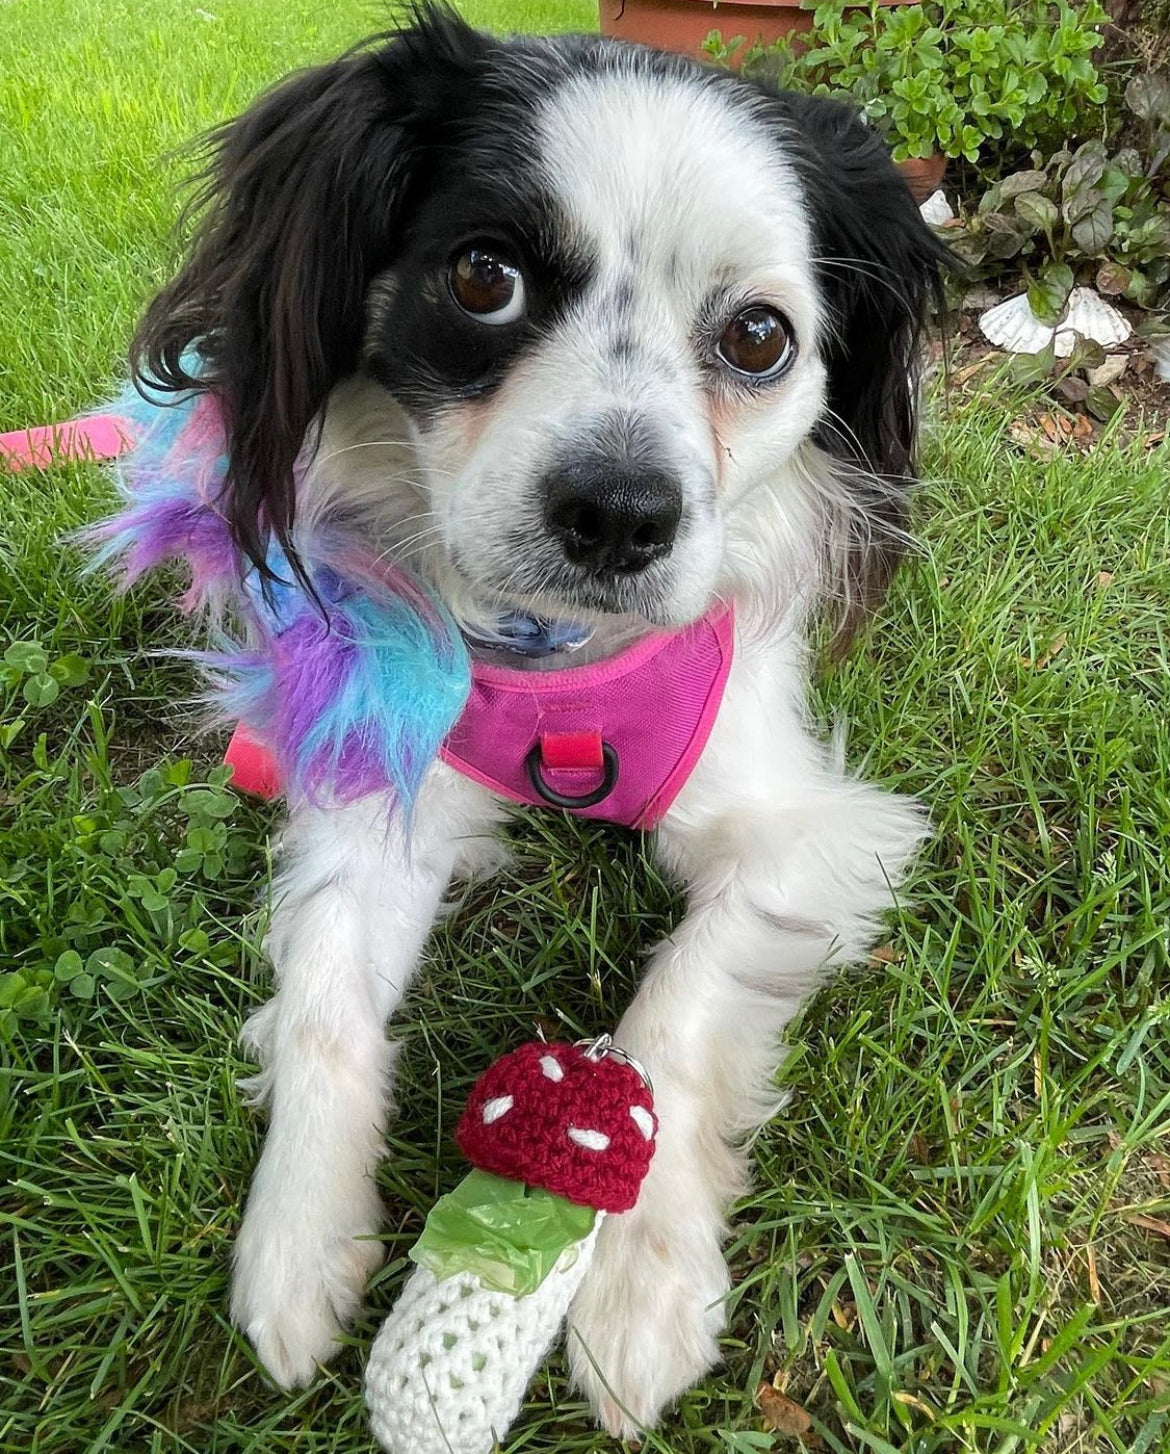 dog posing with a red and white crochet mushroom keychain that is holding doggy poop bags